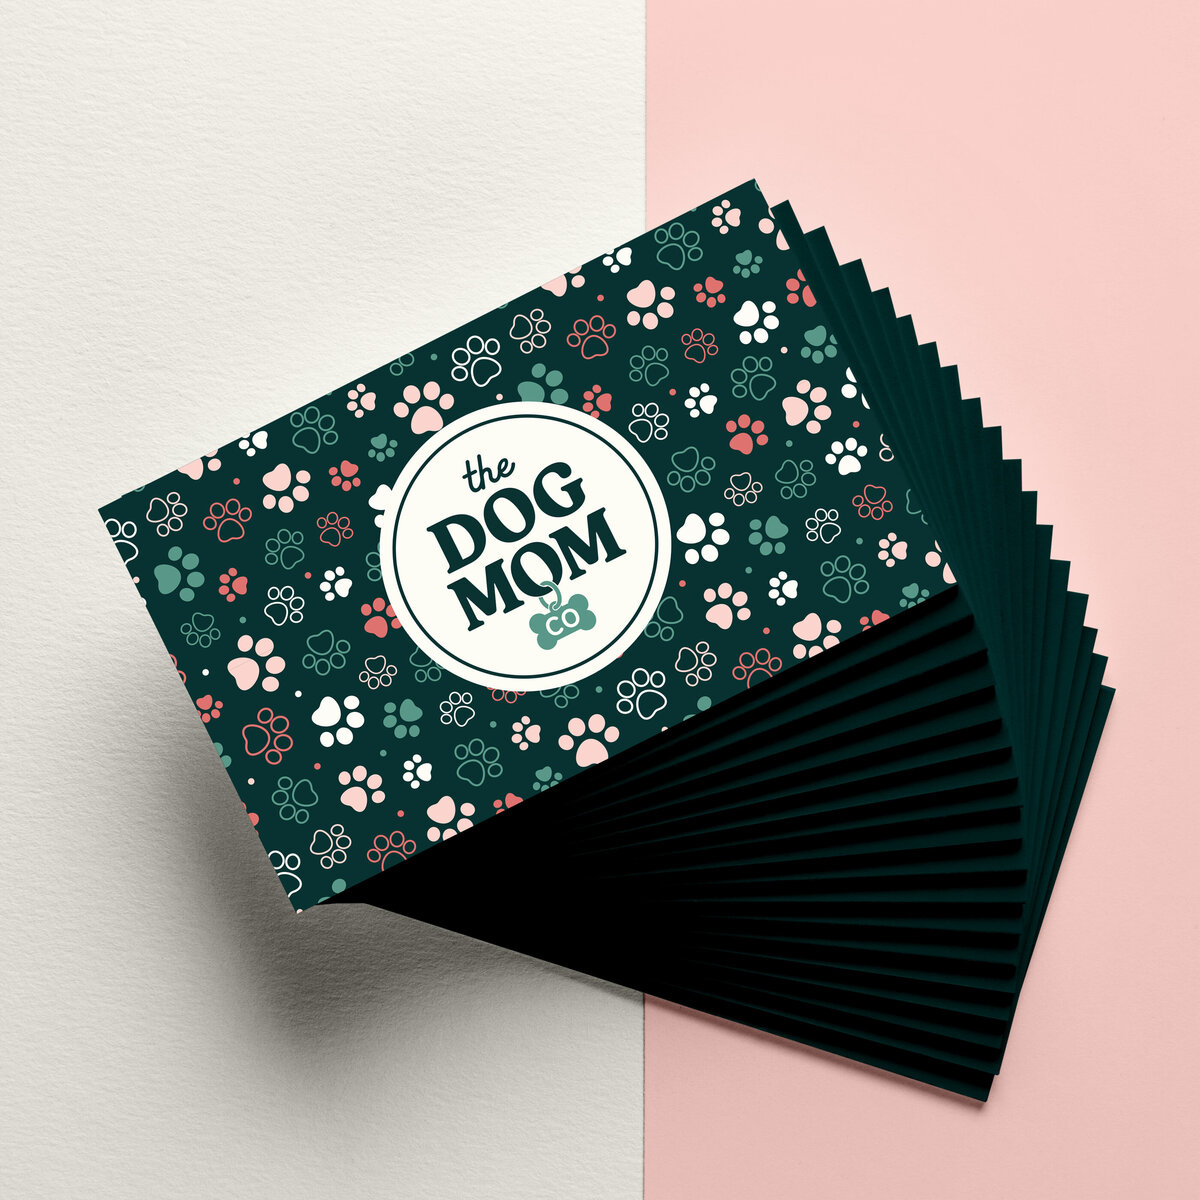 Colourful Branding For Dog Business